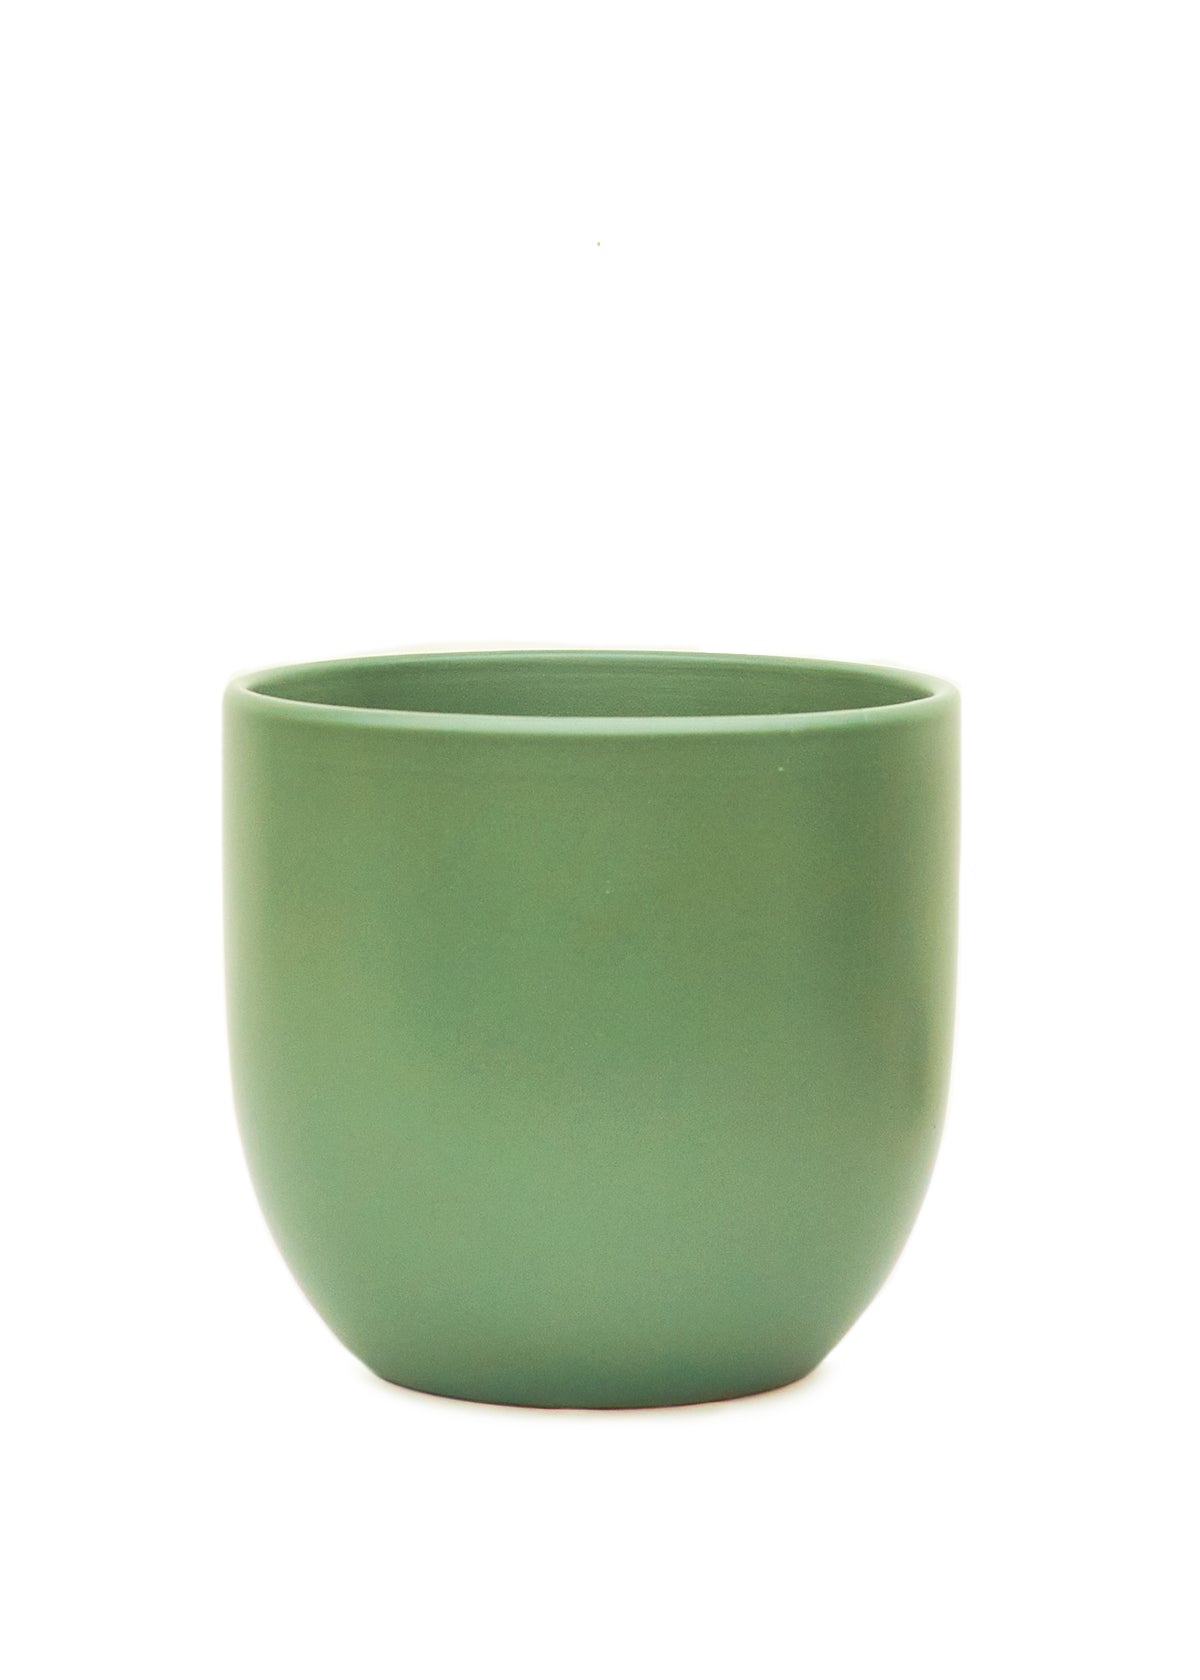 Rounded Ceramic Planter, Green 7" Wide